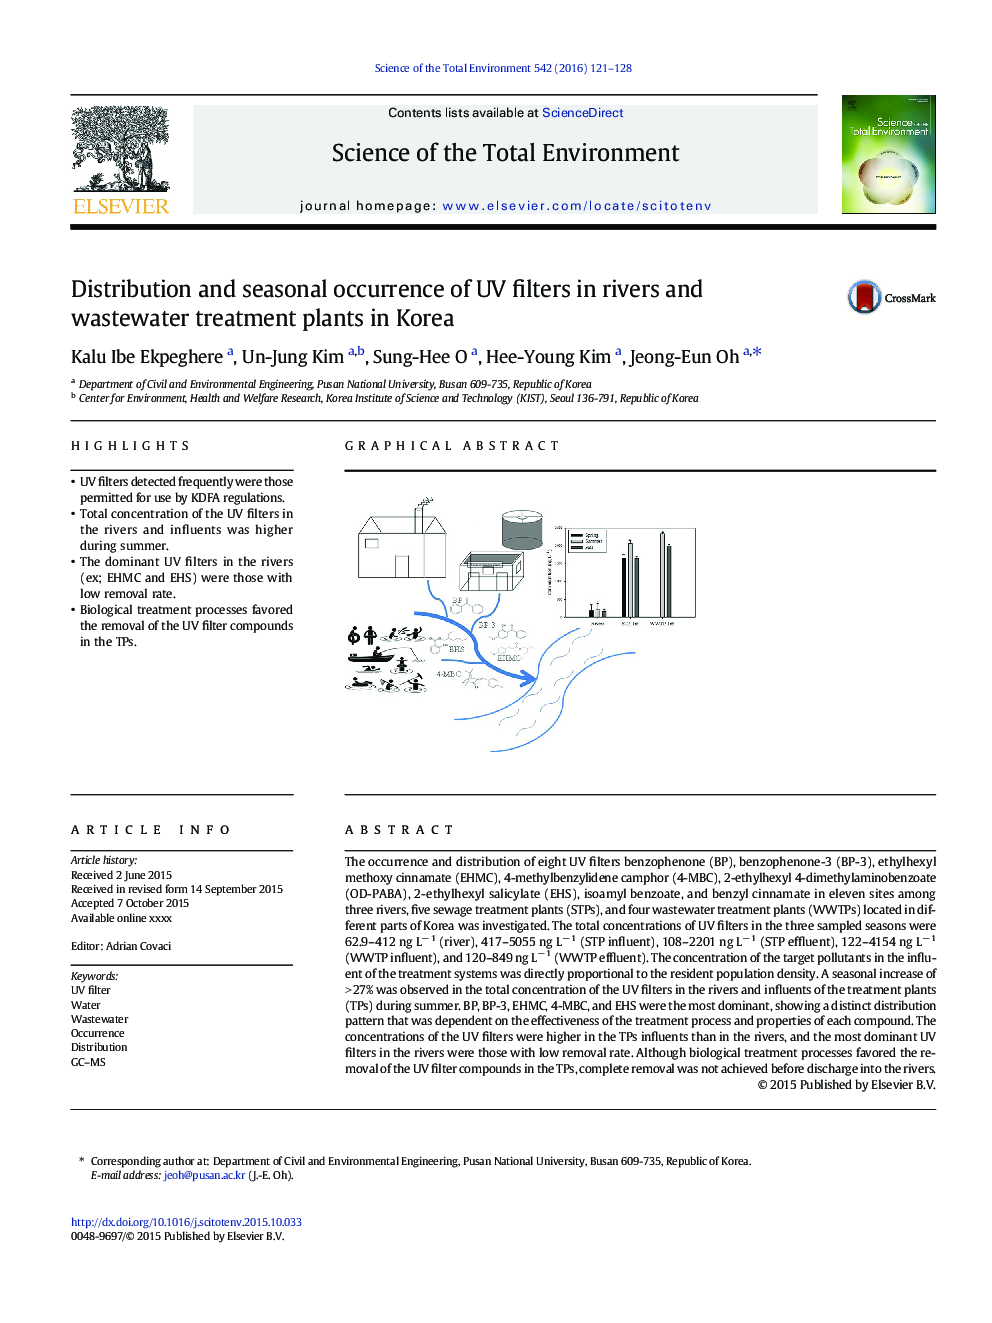 Distribution and seasonal occurrence of UV filters in rivers and wastewater treatment plants in Korea